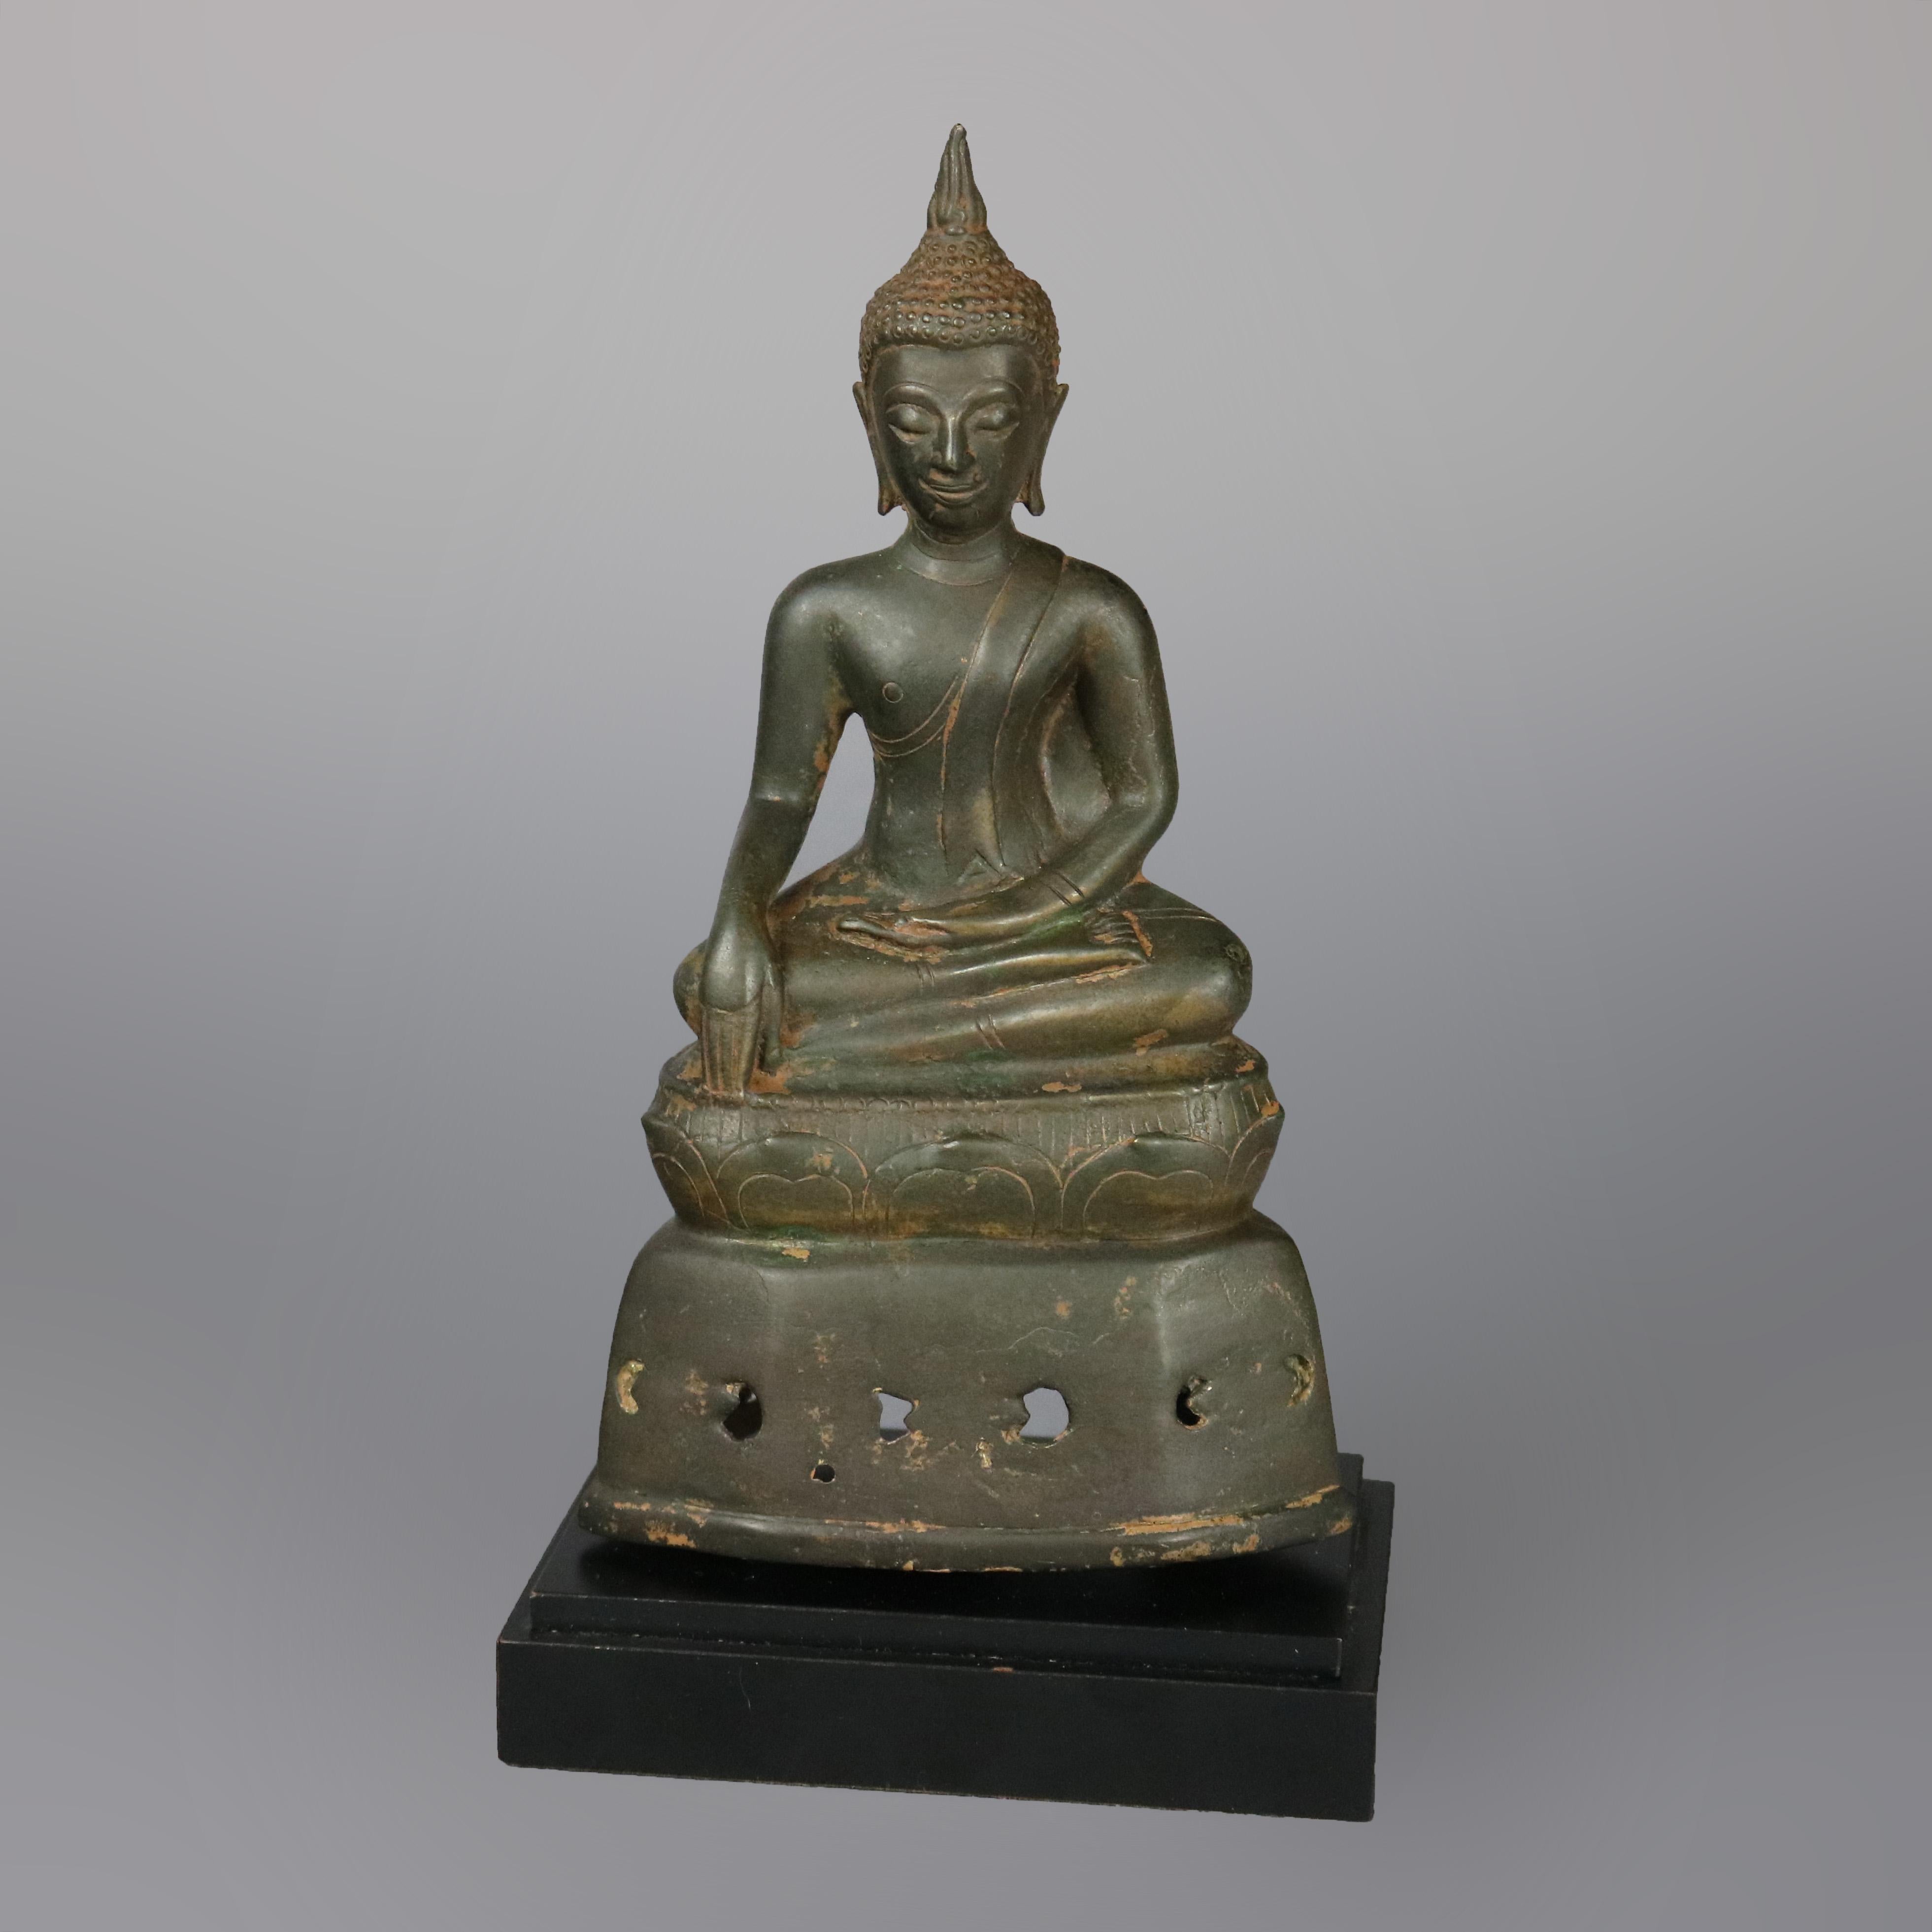 An antique Chinese Buddha sculpture offers cast bronze seated Shiva, 19th century

Measures: 9.75